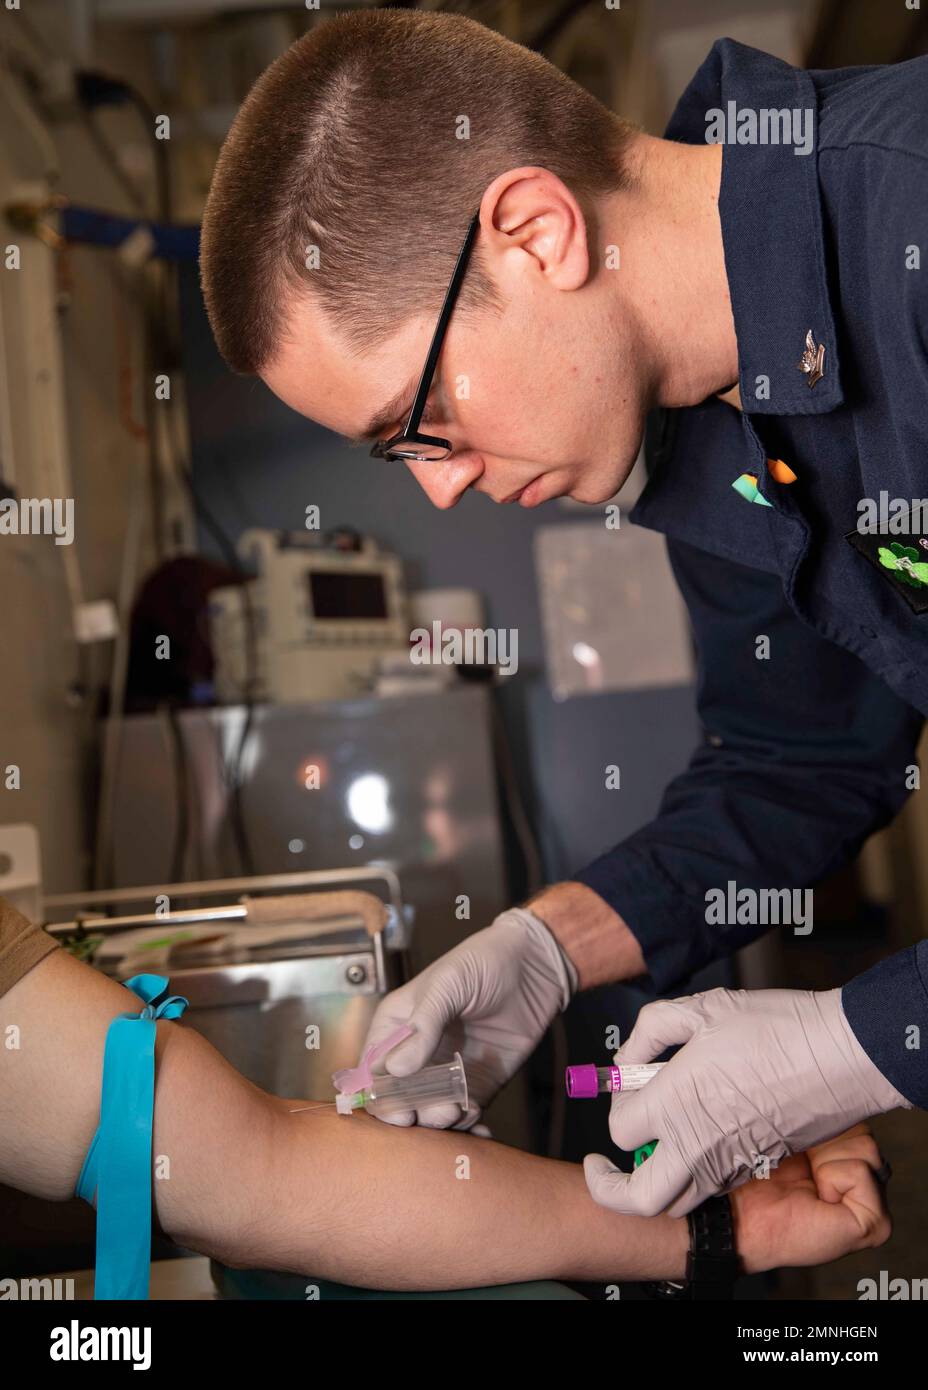 A hospital Corpsman 2nd Class, assigned to the Fleet Surgical Team (FST) 4, takes blood from a patient in the ship's medical department (USS Bataan) ca. 2020 Stock Photo